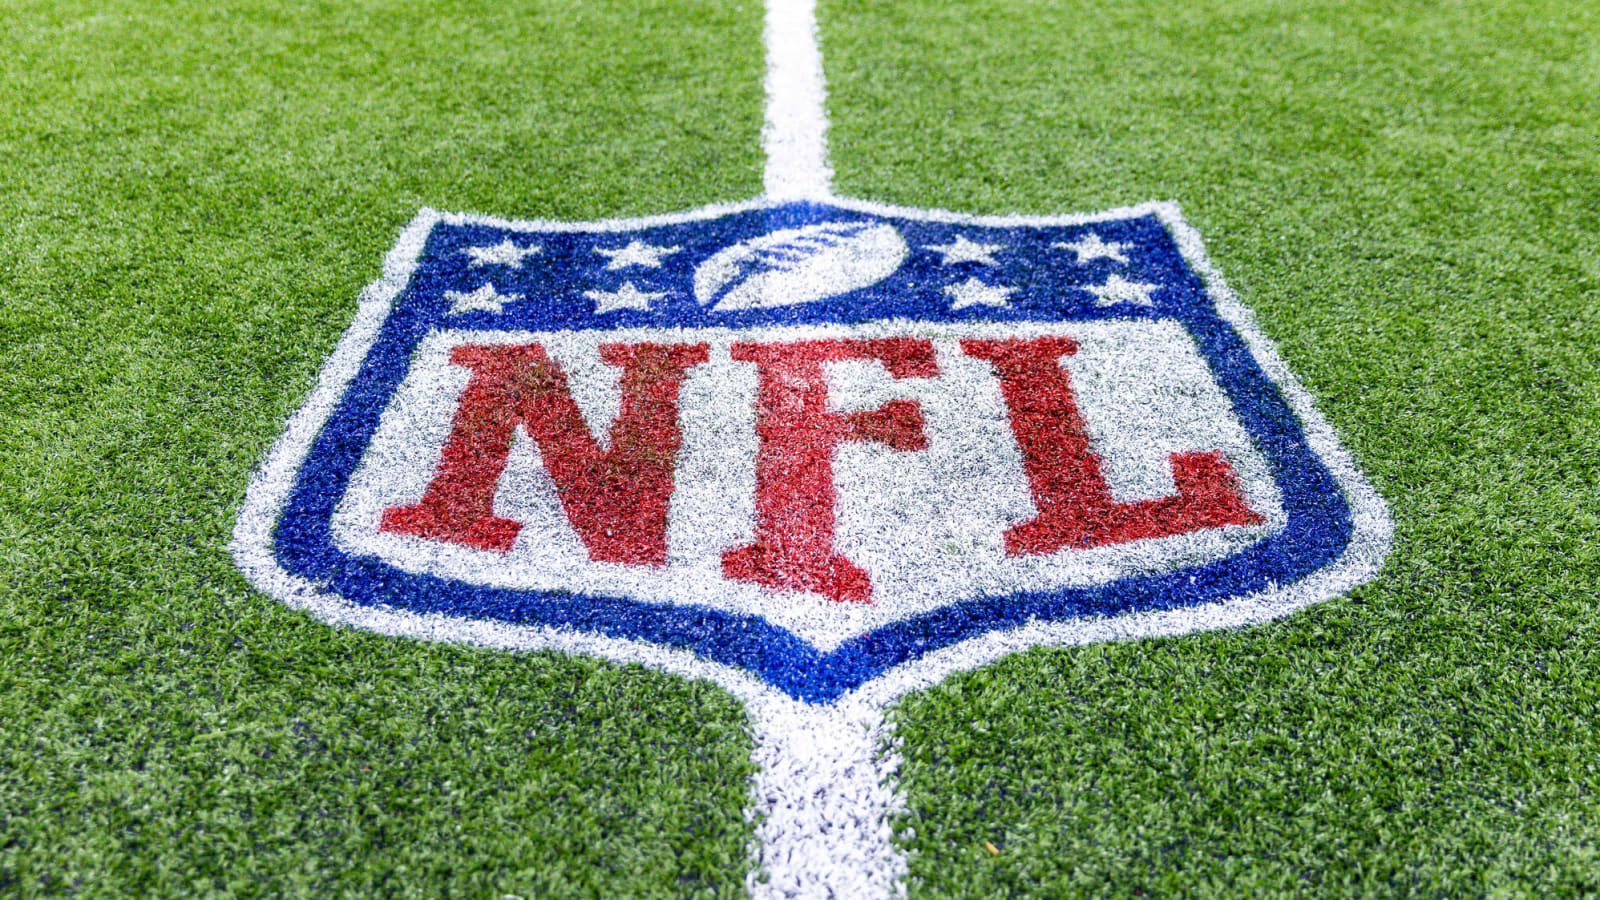 NFL doubles down on gambling rules amid player bans